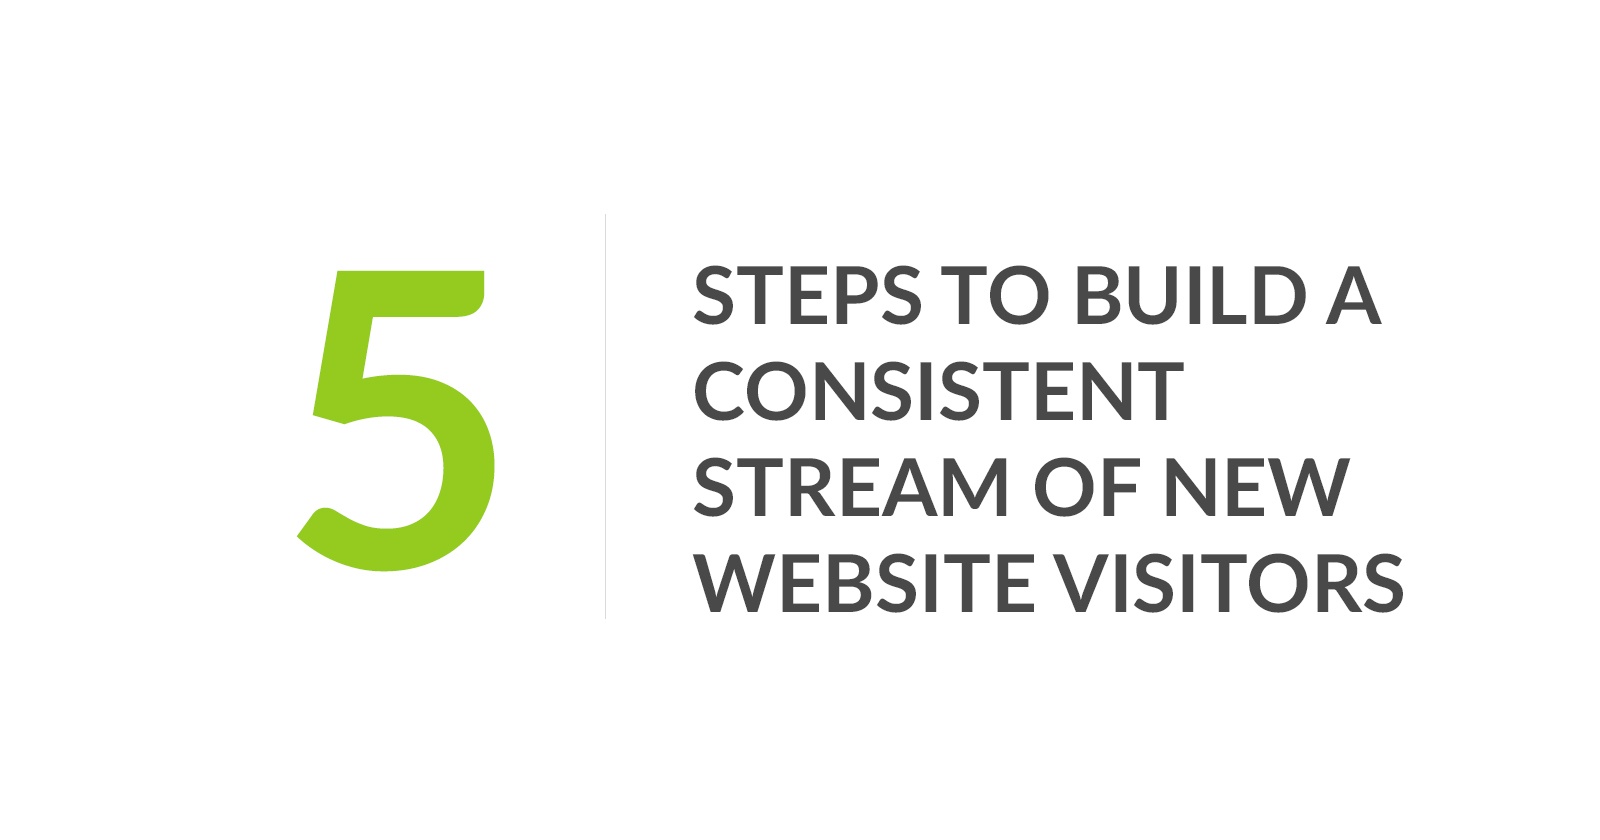 5-steps-to-build-a-consistent-stream-of-new-website-vsitors.jpg?noresize